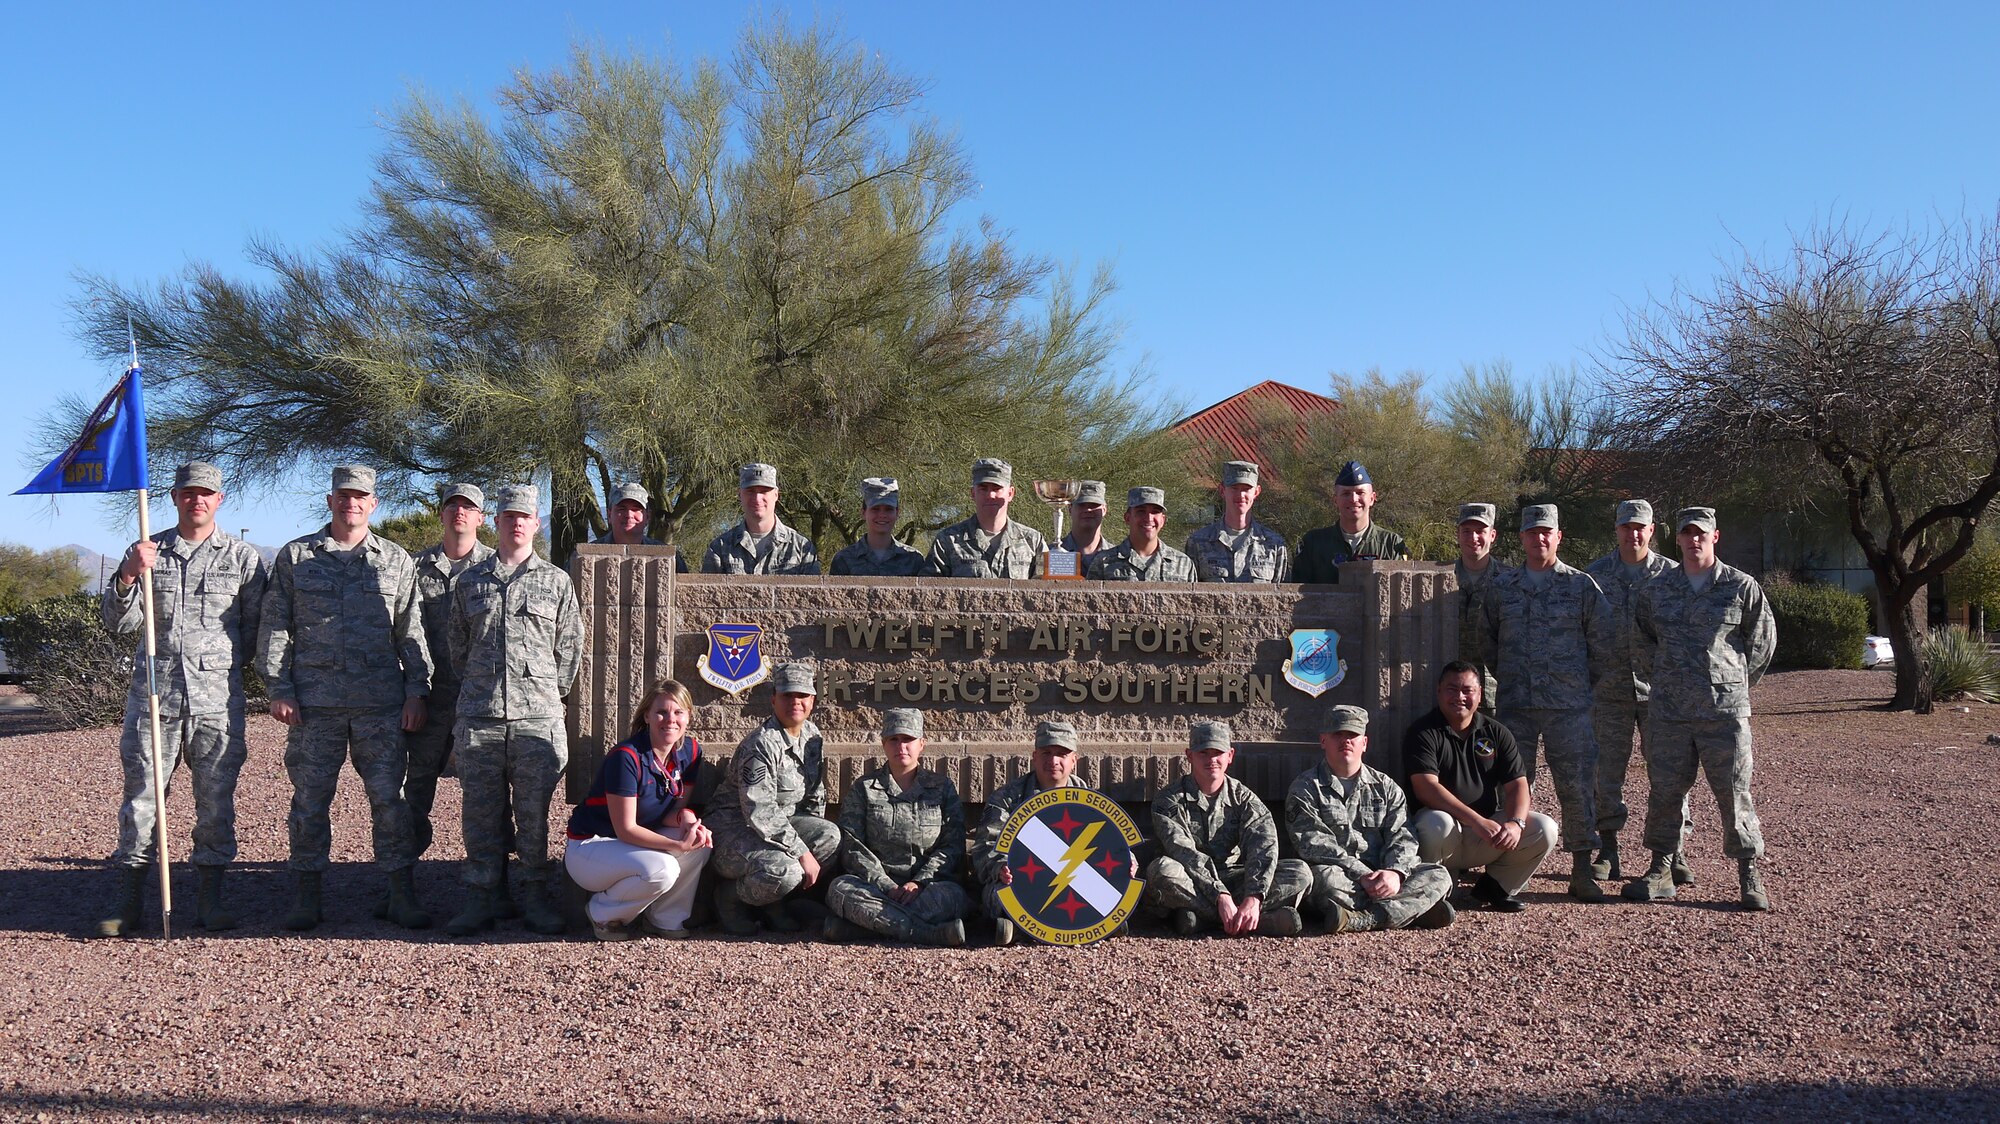 The 612th Support Squadron was awarded the 2012 E.D. Jewett Award by the Tucson Metropolitan Chamber of Commerce, March 7. The E.D. Jewett Award recognizes the squadron at Davis-Monthan AFB that best represents the finest tradition of military excellence and community involvement in the previous year. (Courtesy photo).